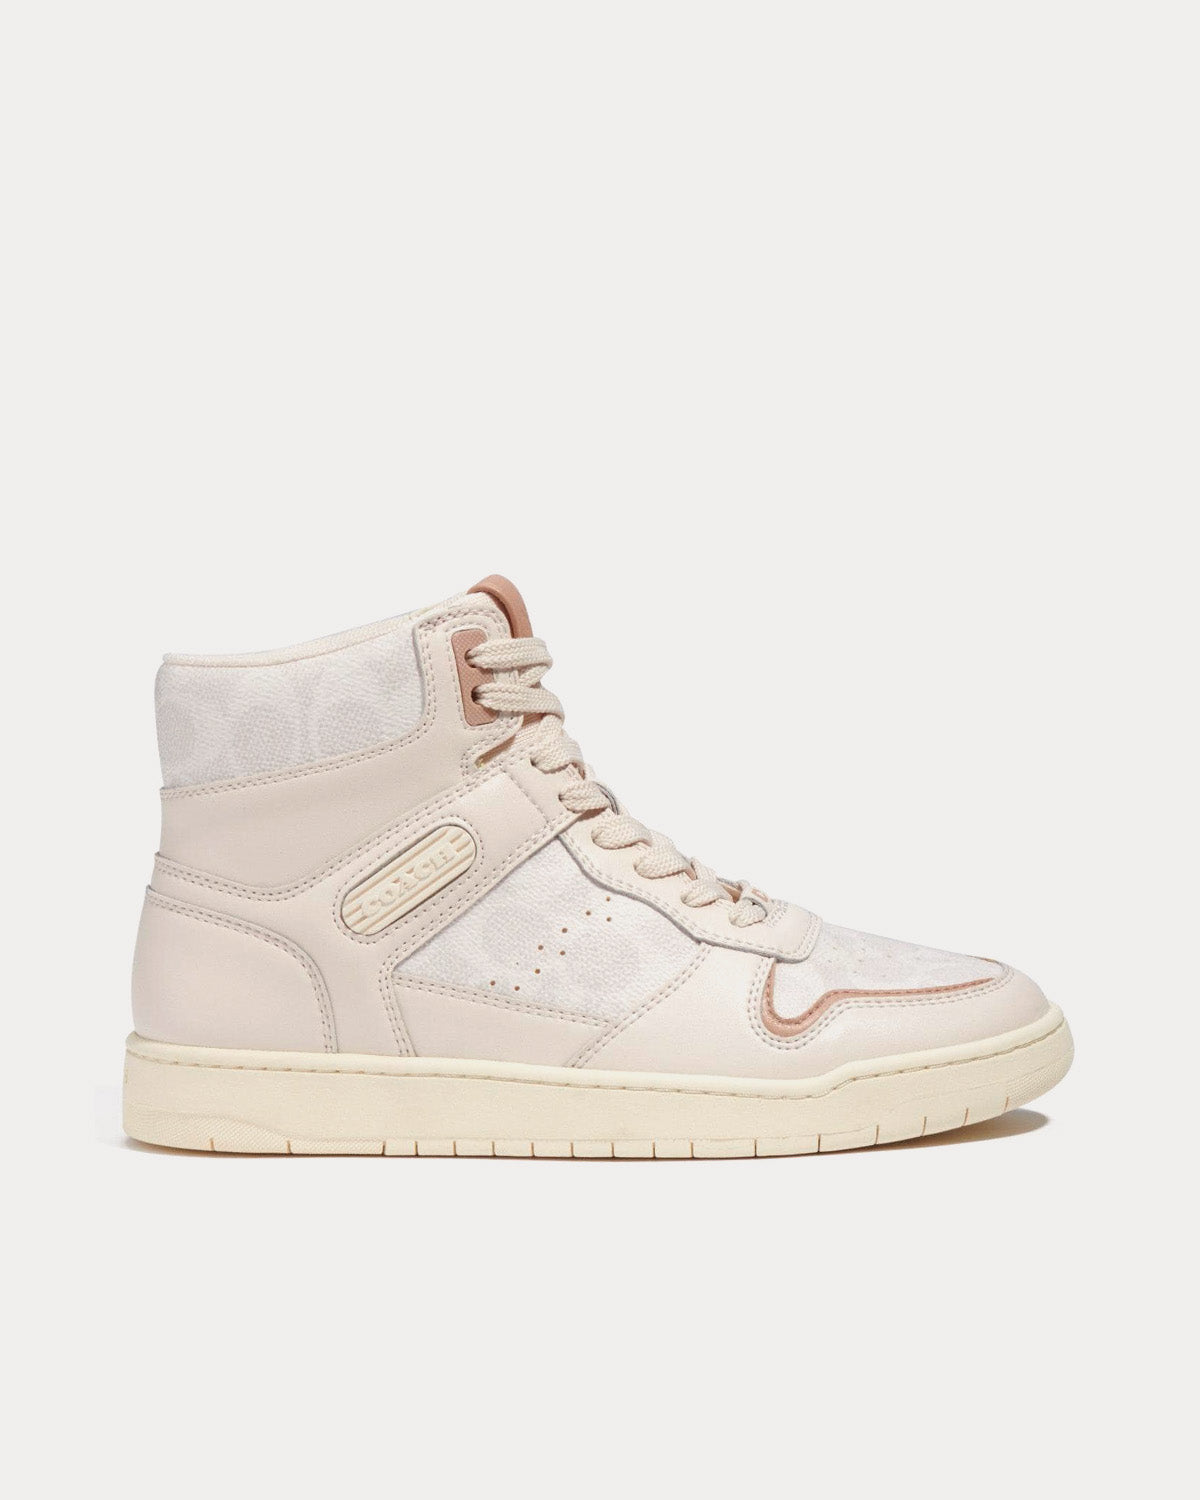 Coach Retro Signature Canvas & Leather Chalk High Top Sneakers